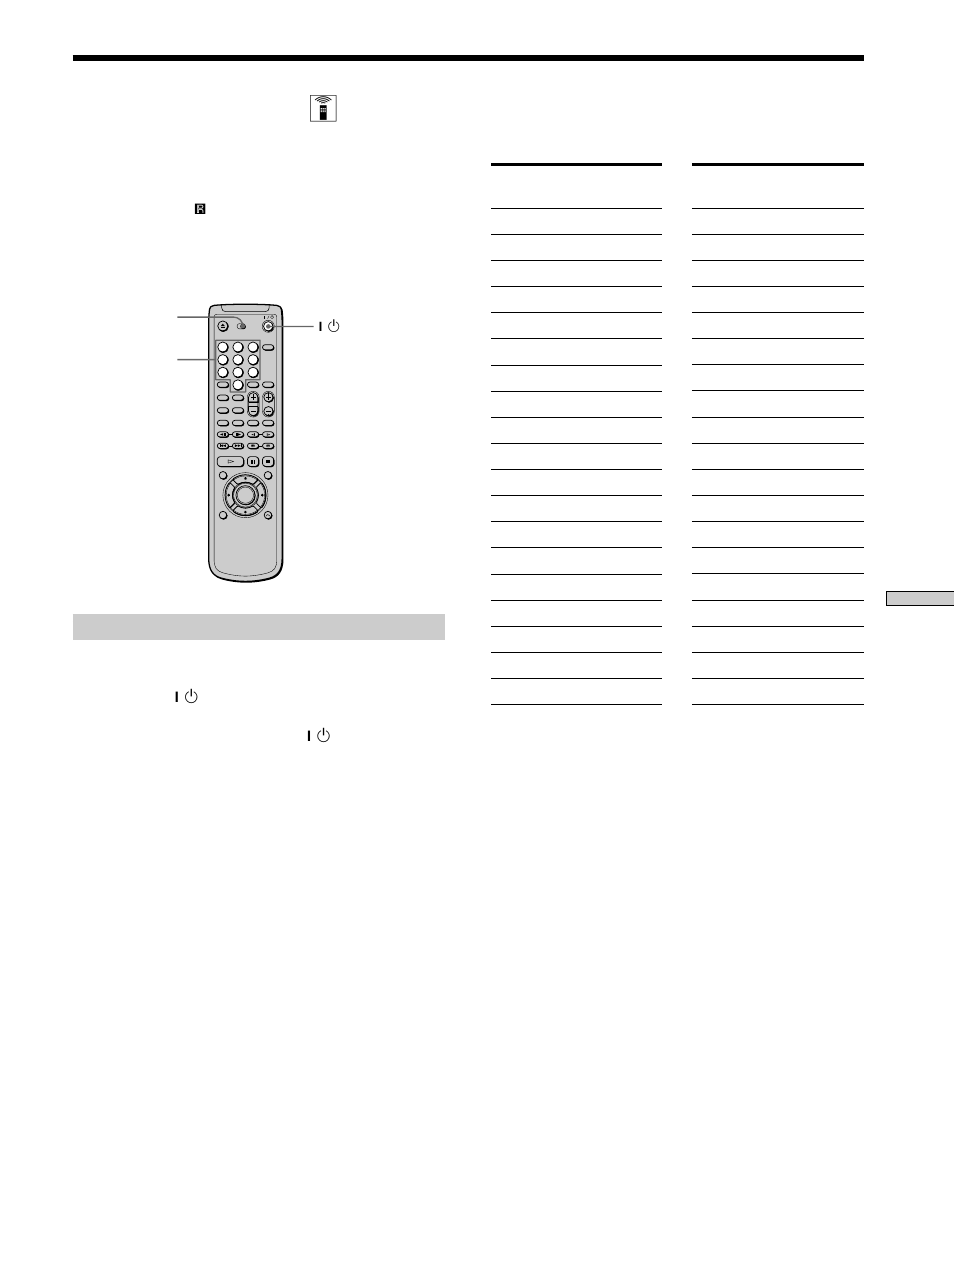 Controlling tvs with the remote | Sony DVP S530D User Manual | Page 53 / 68